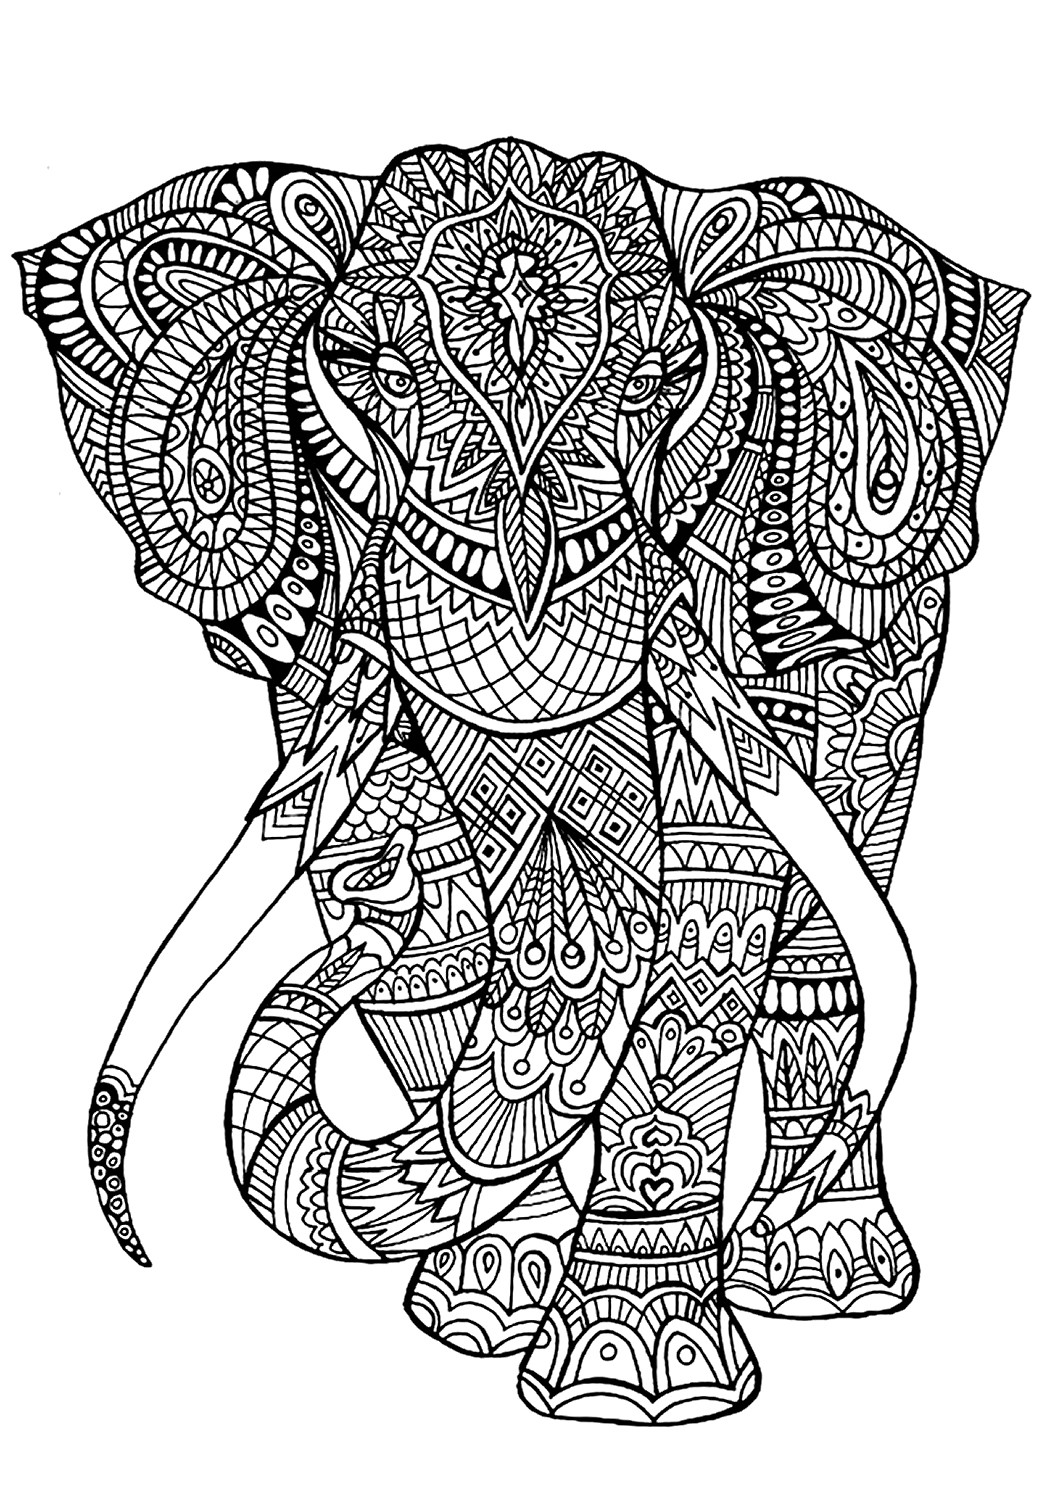 Print Free Coloring Pages For Adults
 like this one intended for adults to color can